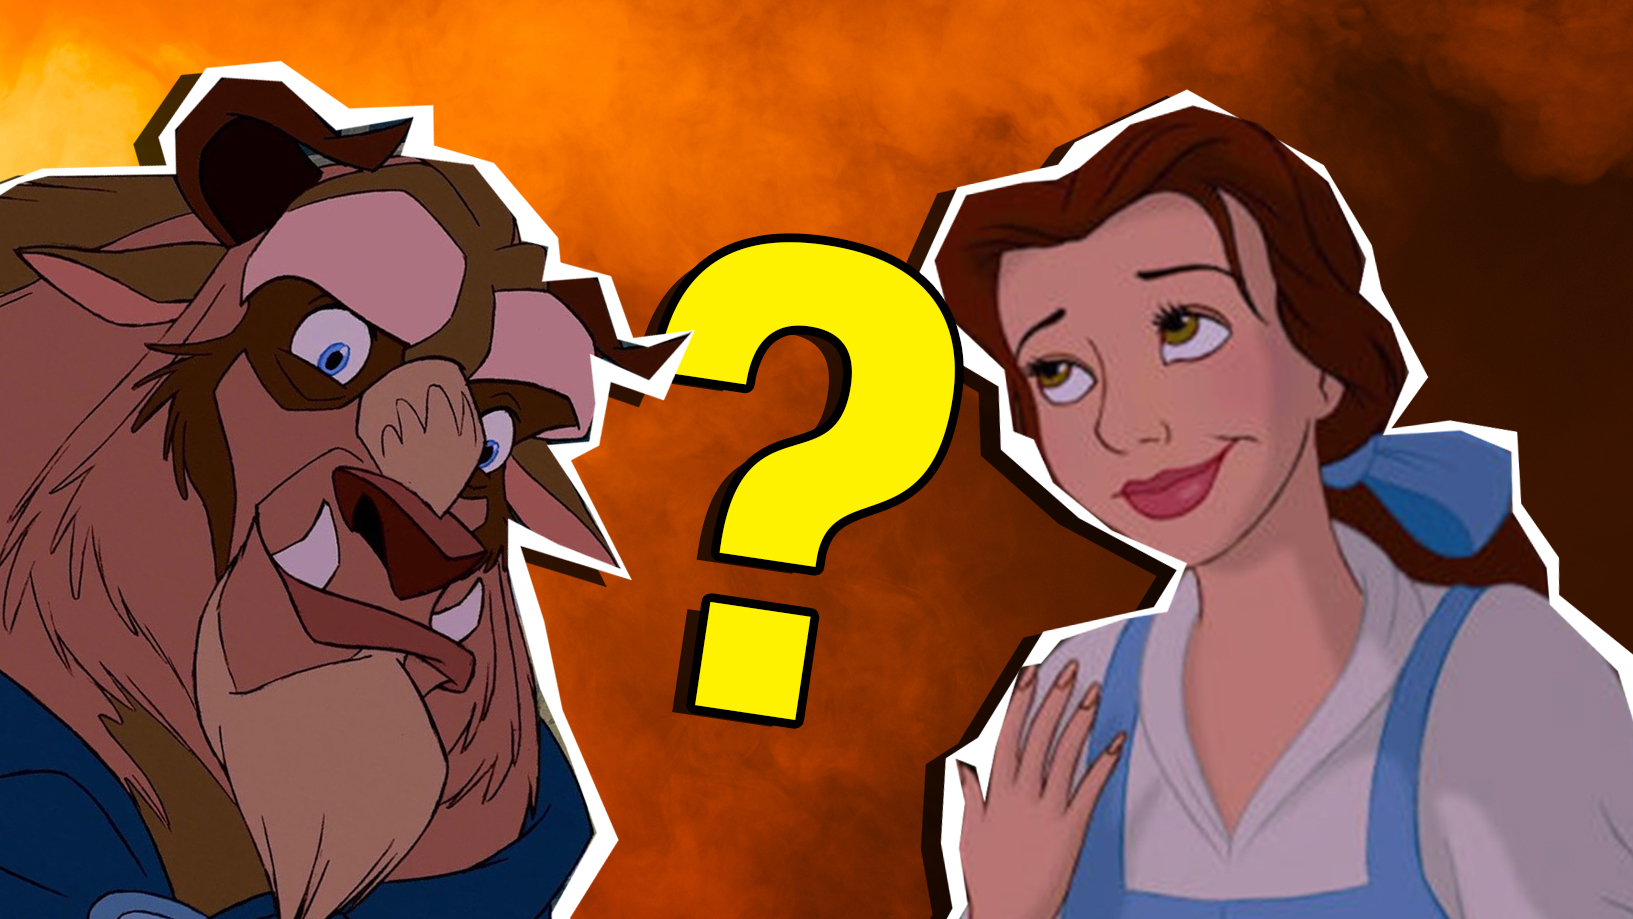 Which Beauty And The Beast Character Are You?